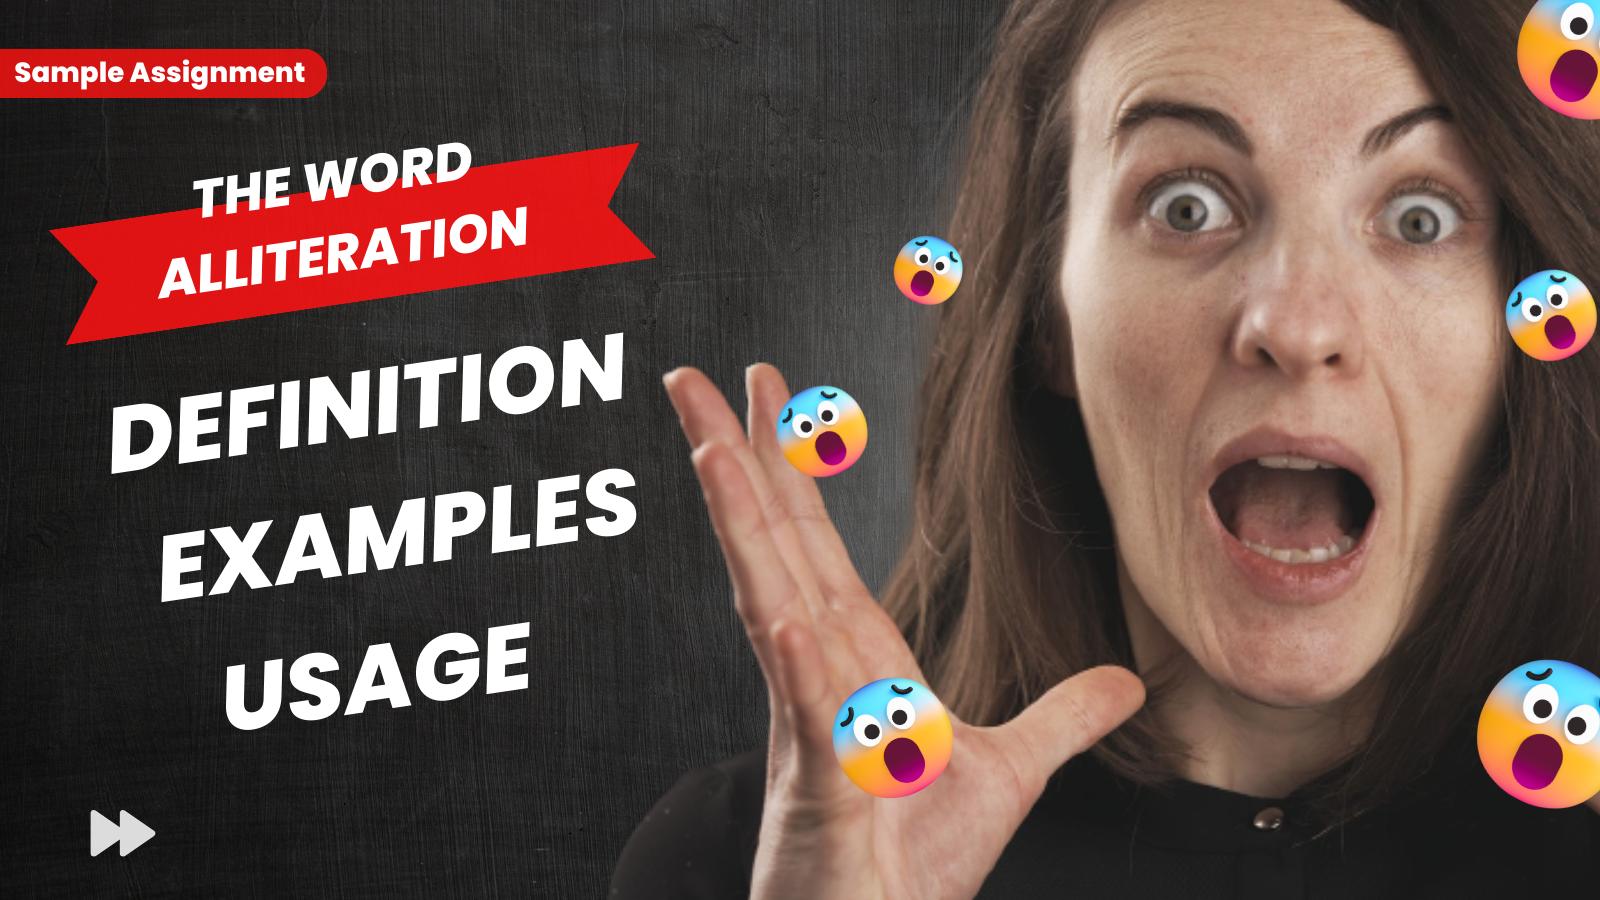 Alliteration Learn the Definition, Usage & Examples